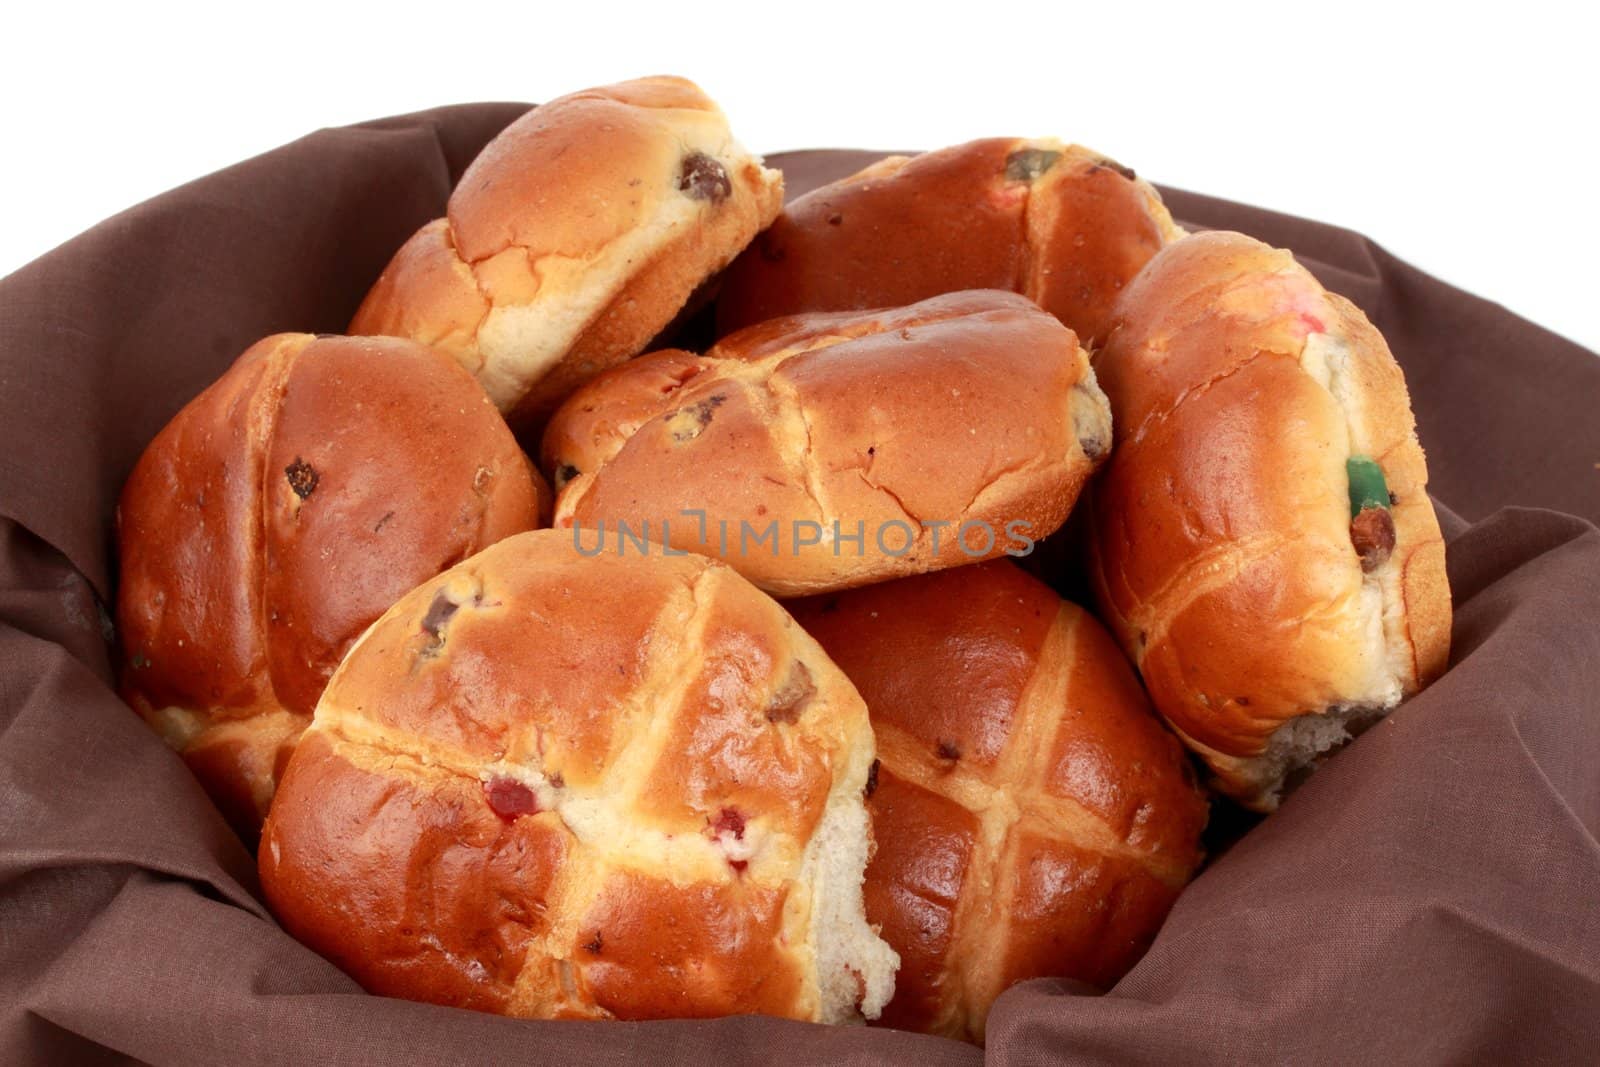 hot cross buns in a basket, white background